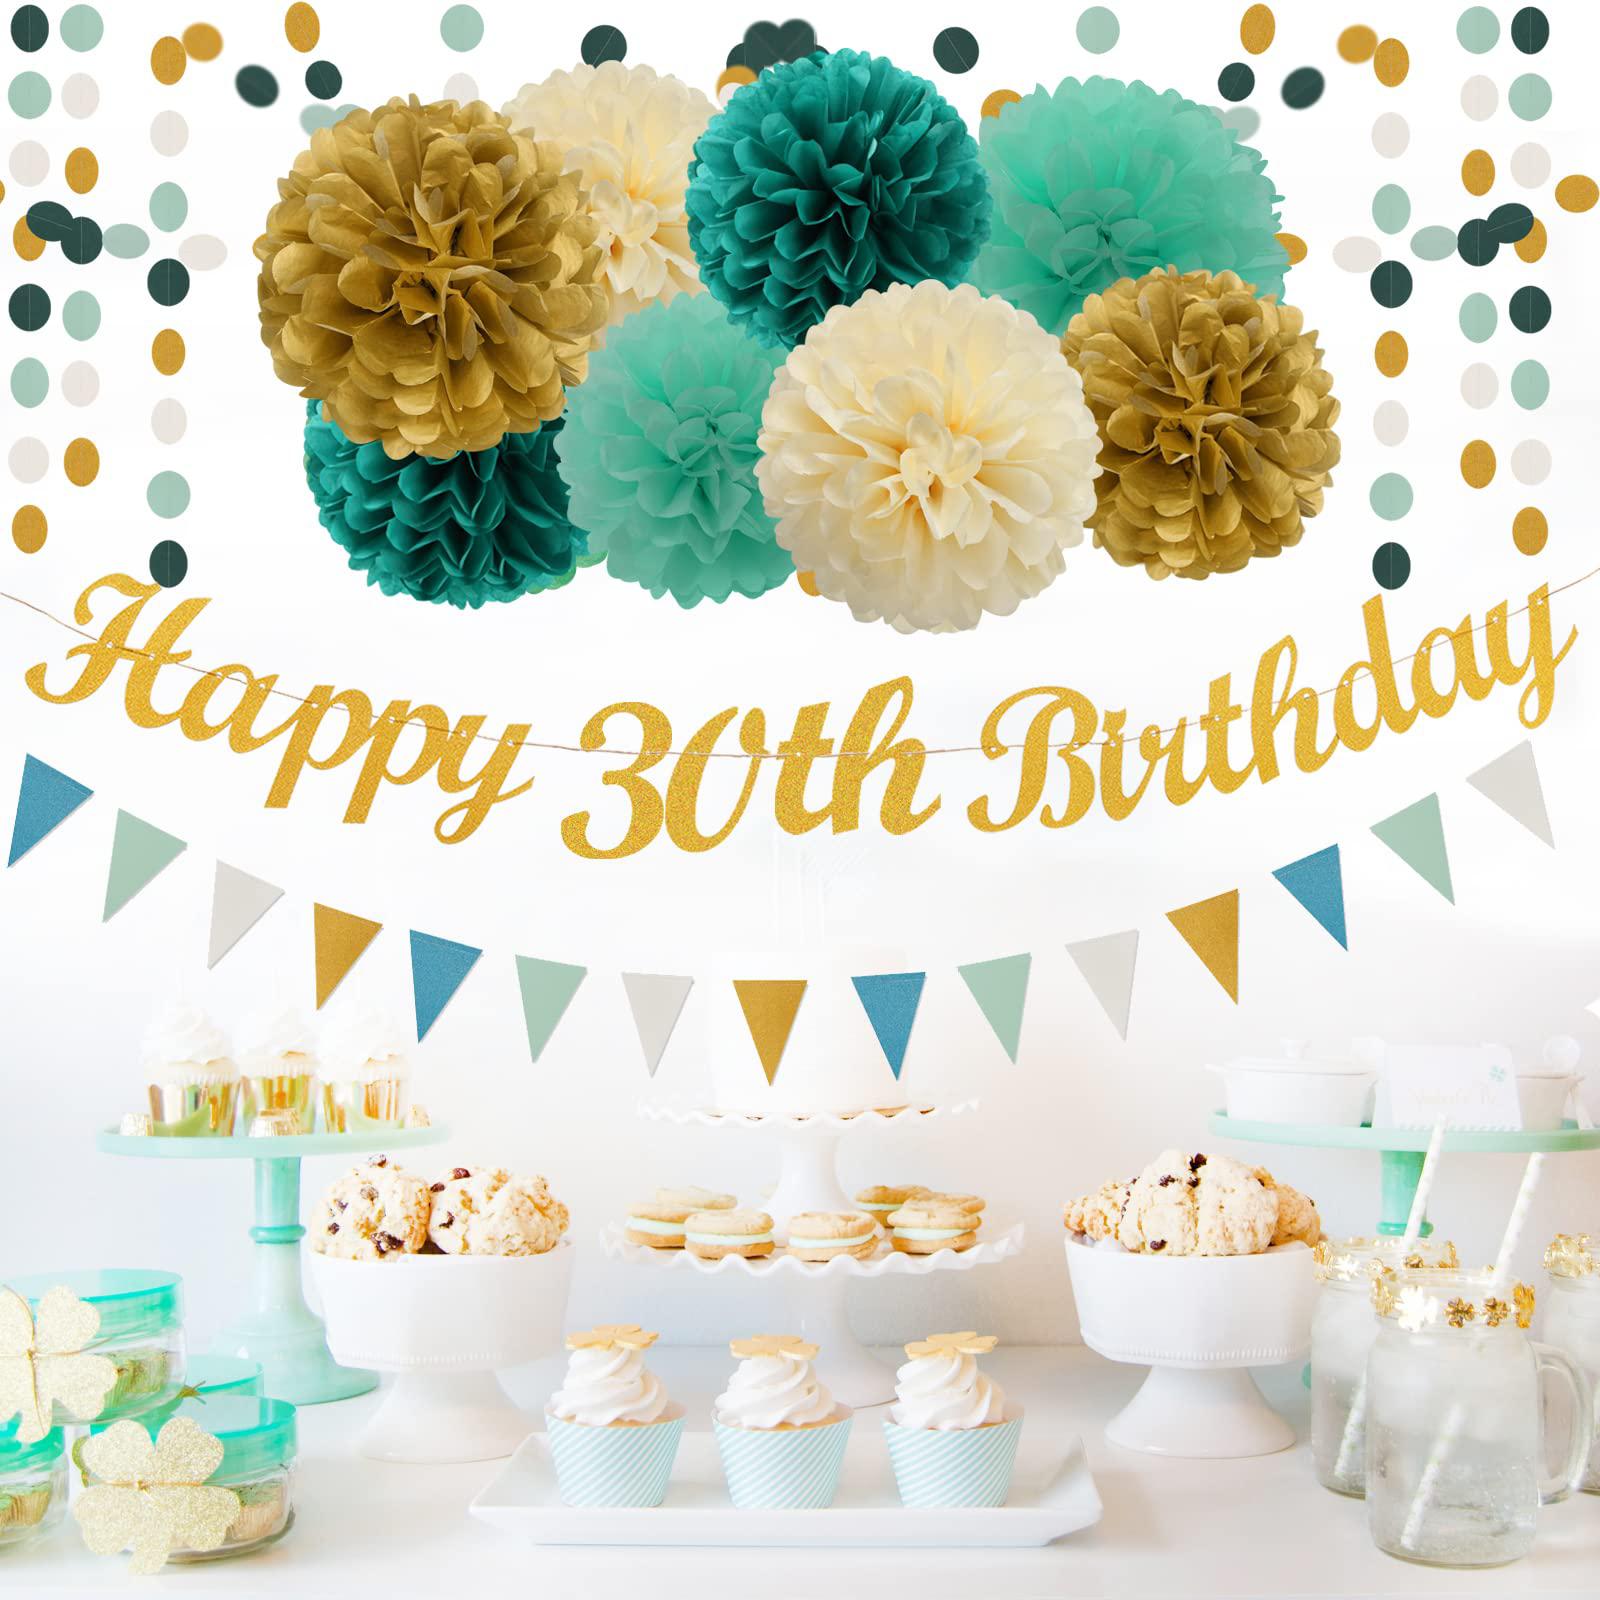 Panduola teal-blue mint beige-gold 30th-birthday party decorations - 31pcs  tissue pom poms streamers,baby